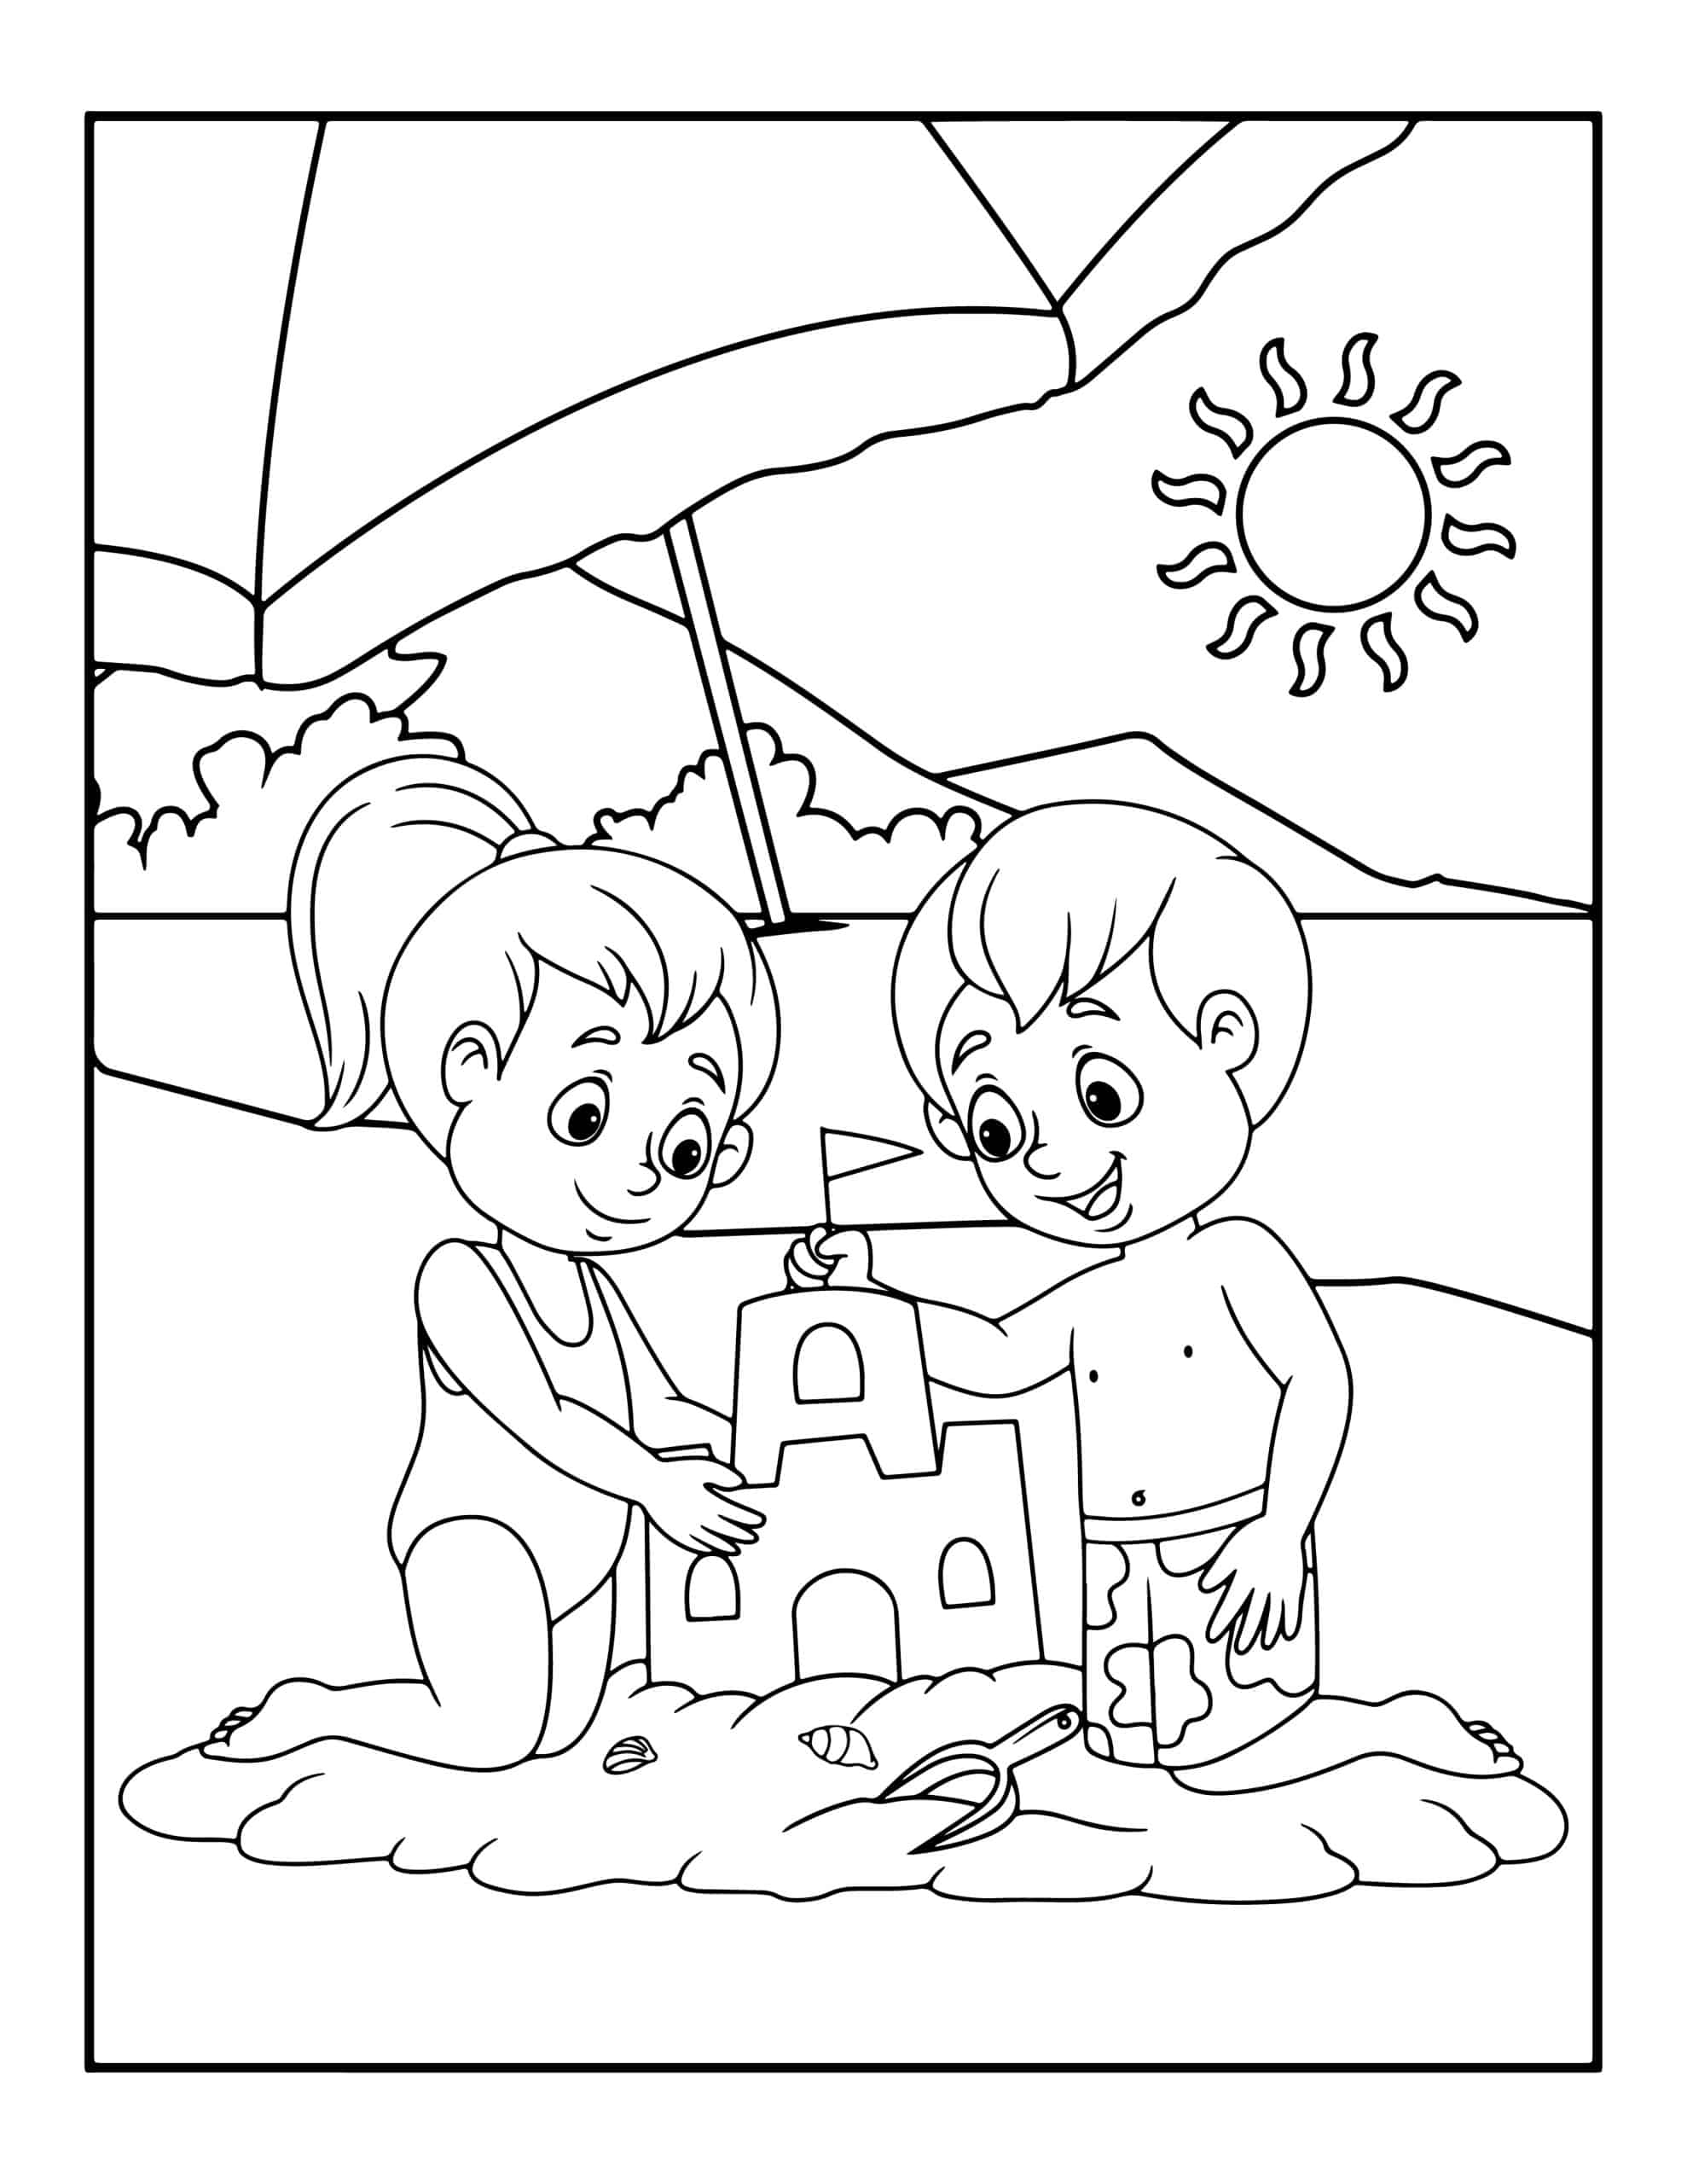 Free summer coloring pages updated